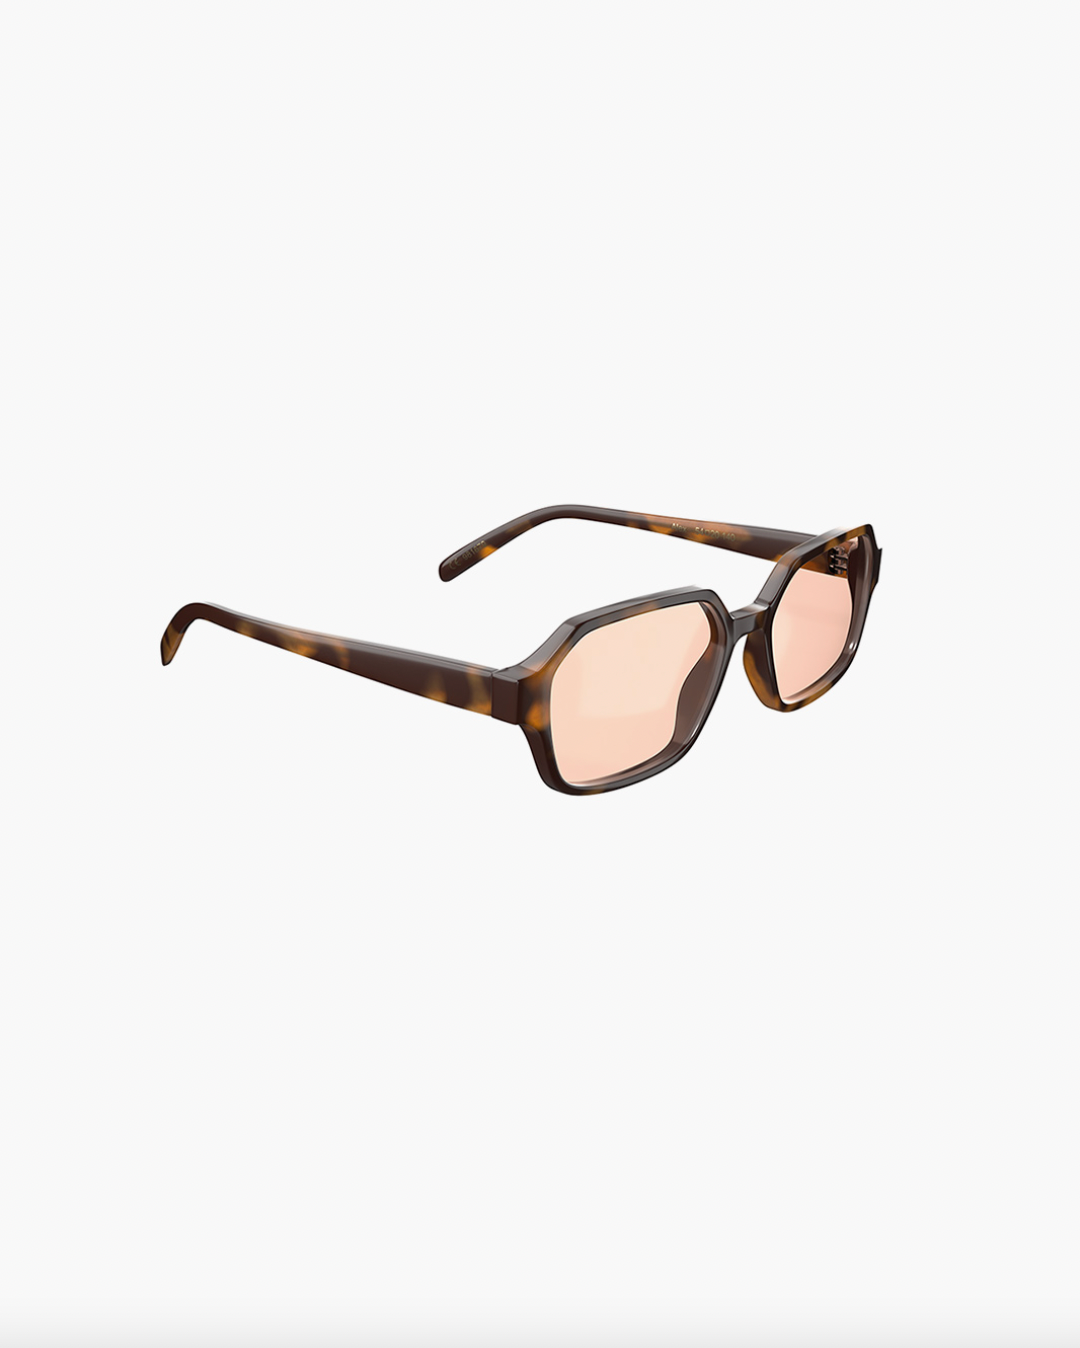 Get ready to turn heads with our Alex Tortoise Cinnamon sunglasses by Corlin Eyewear. These sunglasses feature UV protection 400 and scratch-resistant CR39 lenses, perfect for any outdoor activity.